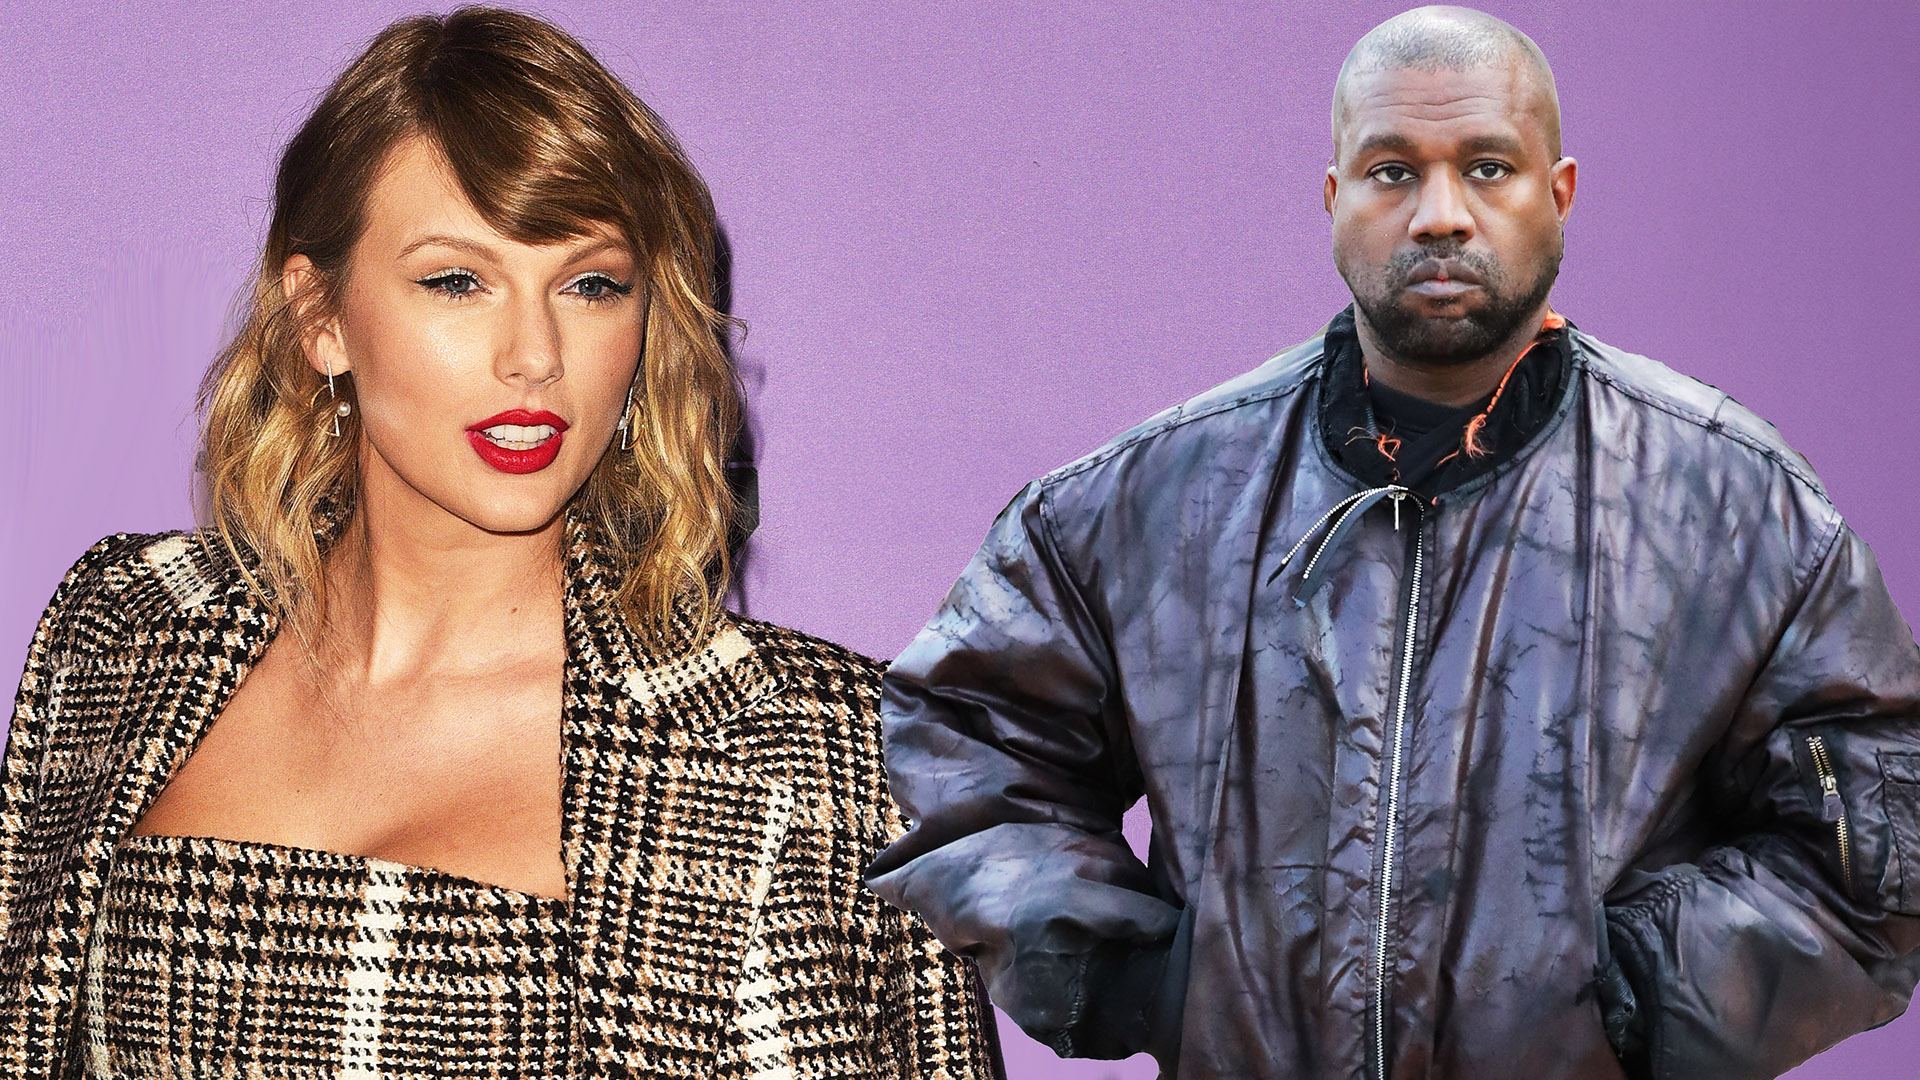 Taylor Swift's 6 Celebrity Feuds (and Kanye's Not Even on the List!)